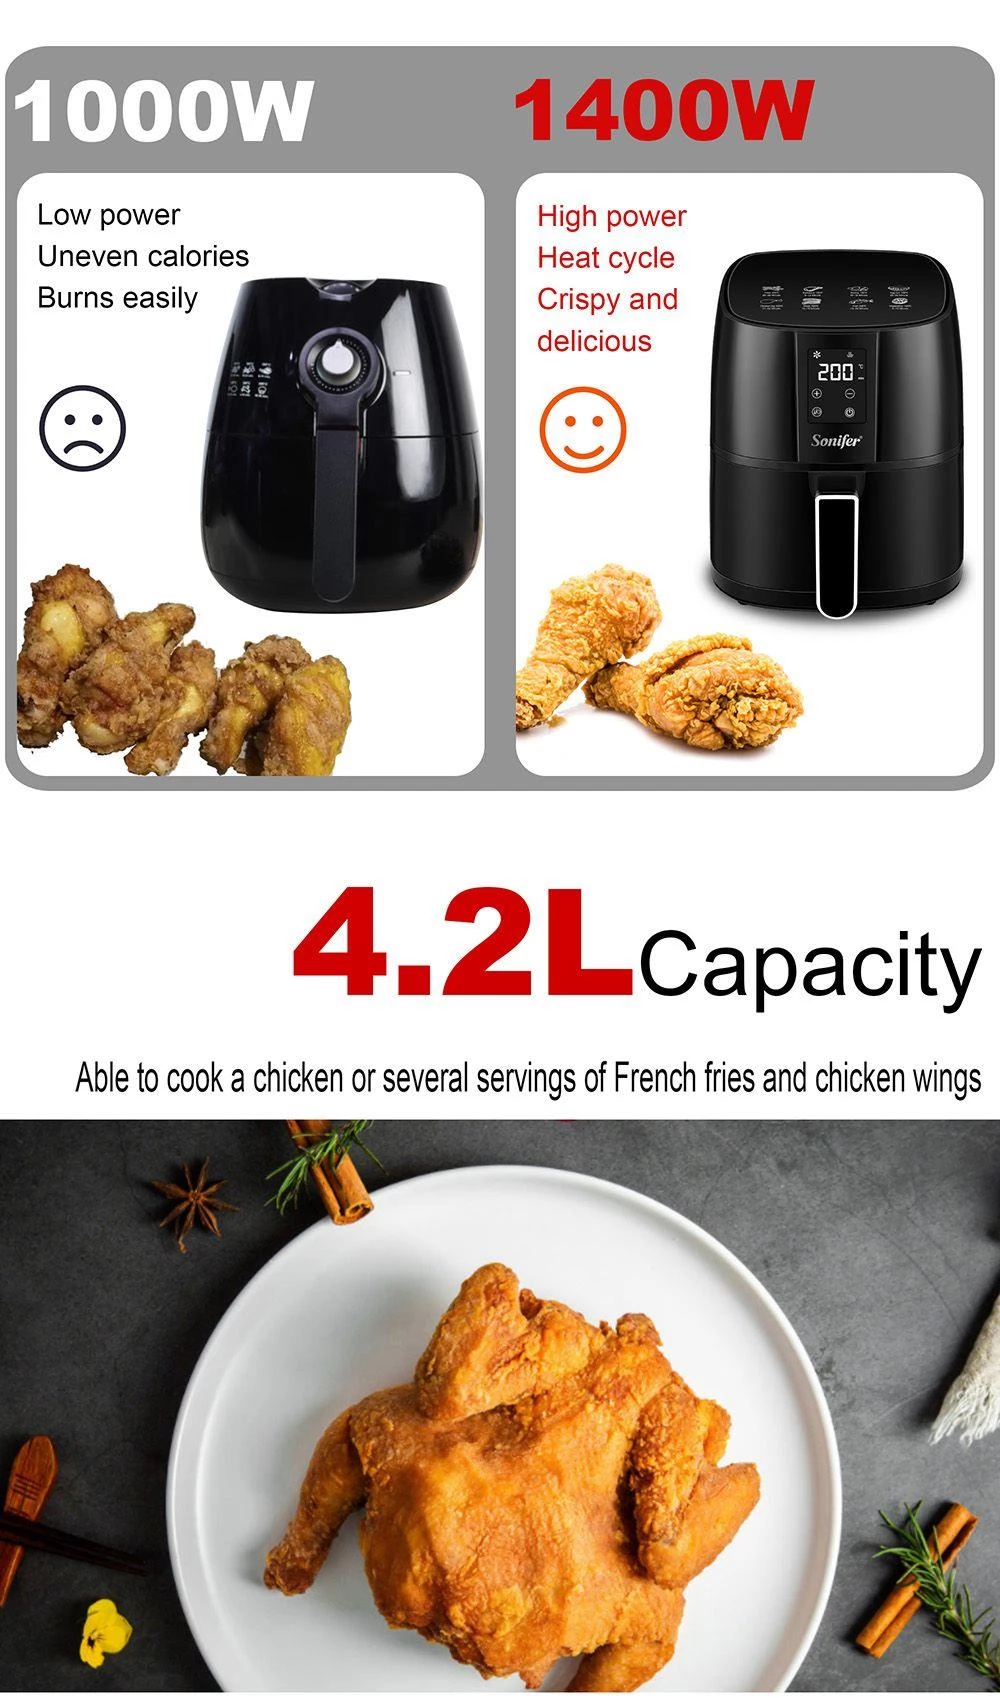 Sonifer SF1010 1400W 4.2L Air Fryer without Oil Oven, Touchscreen 360 Degree Baking, Electric Deep Fryer Nonstick Basket